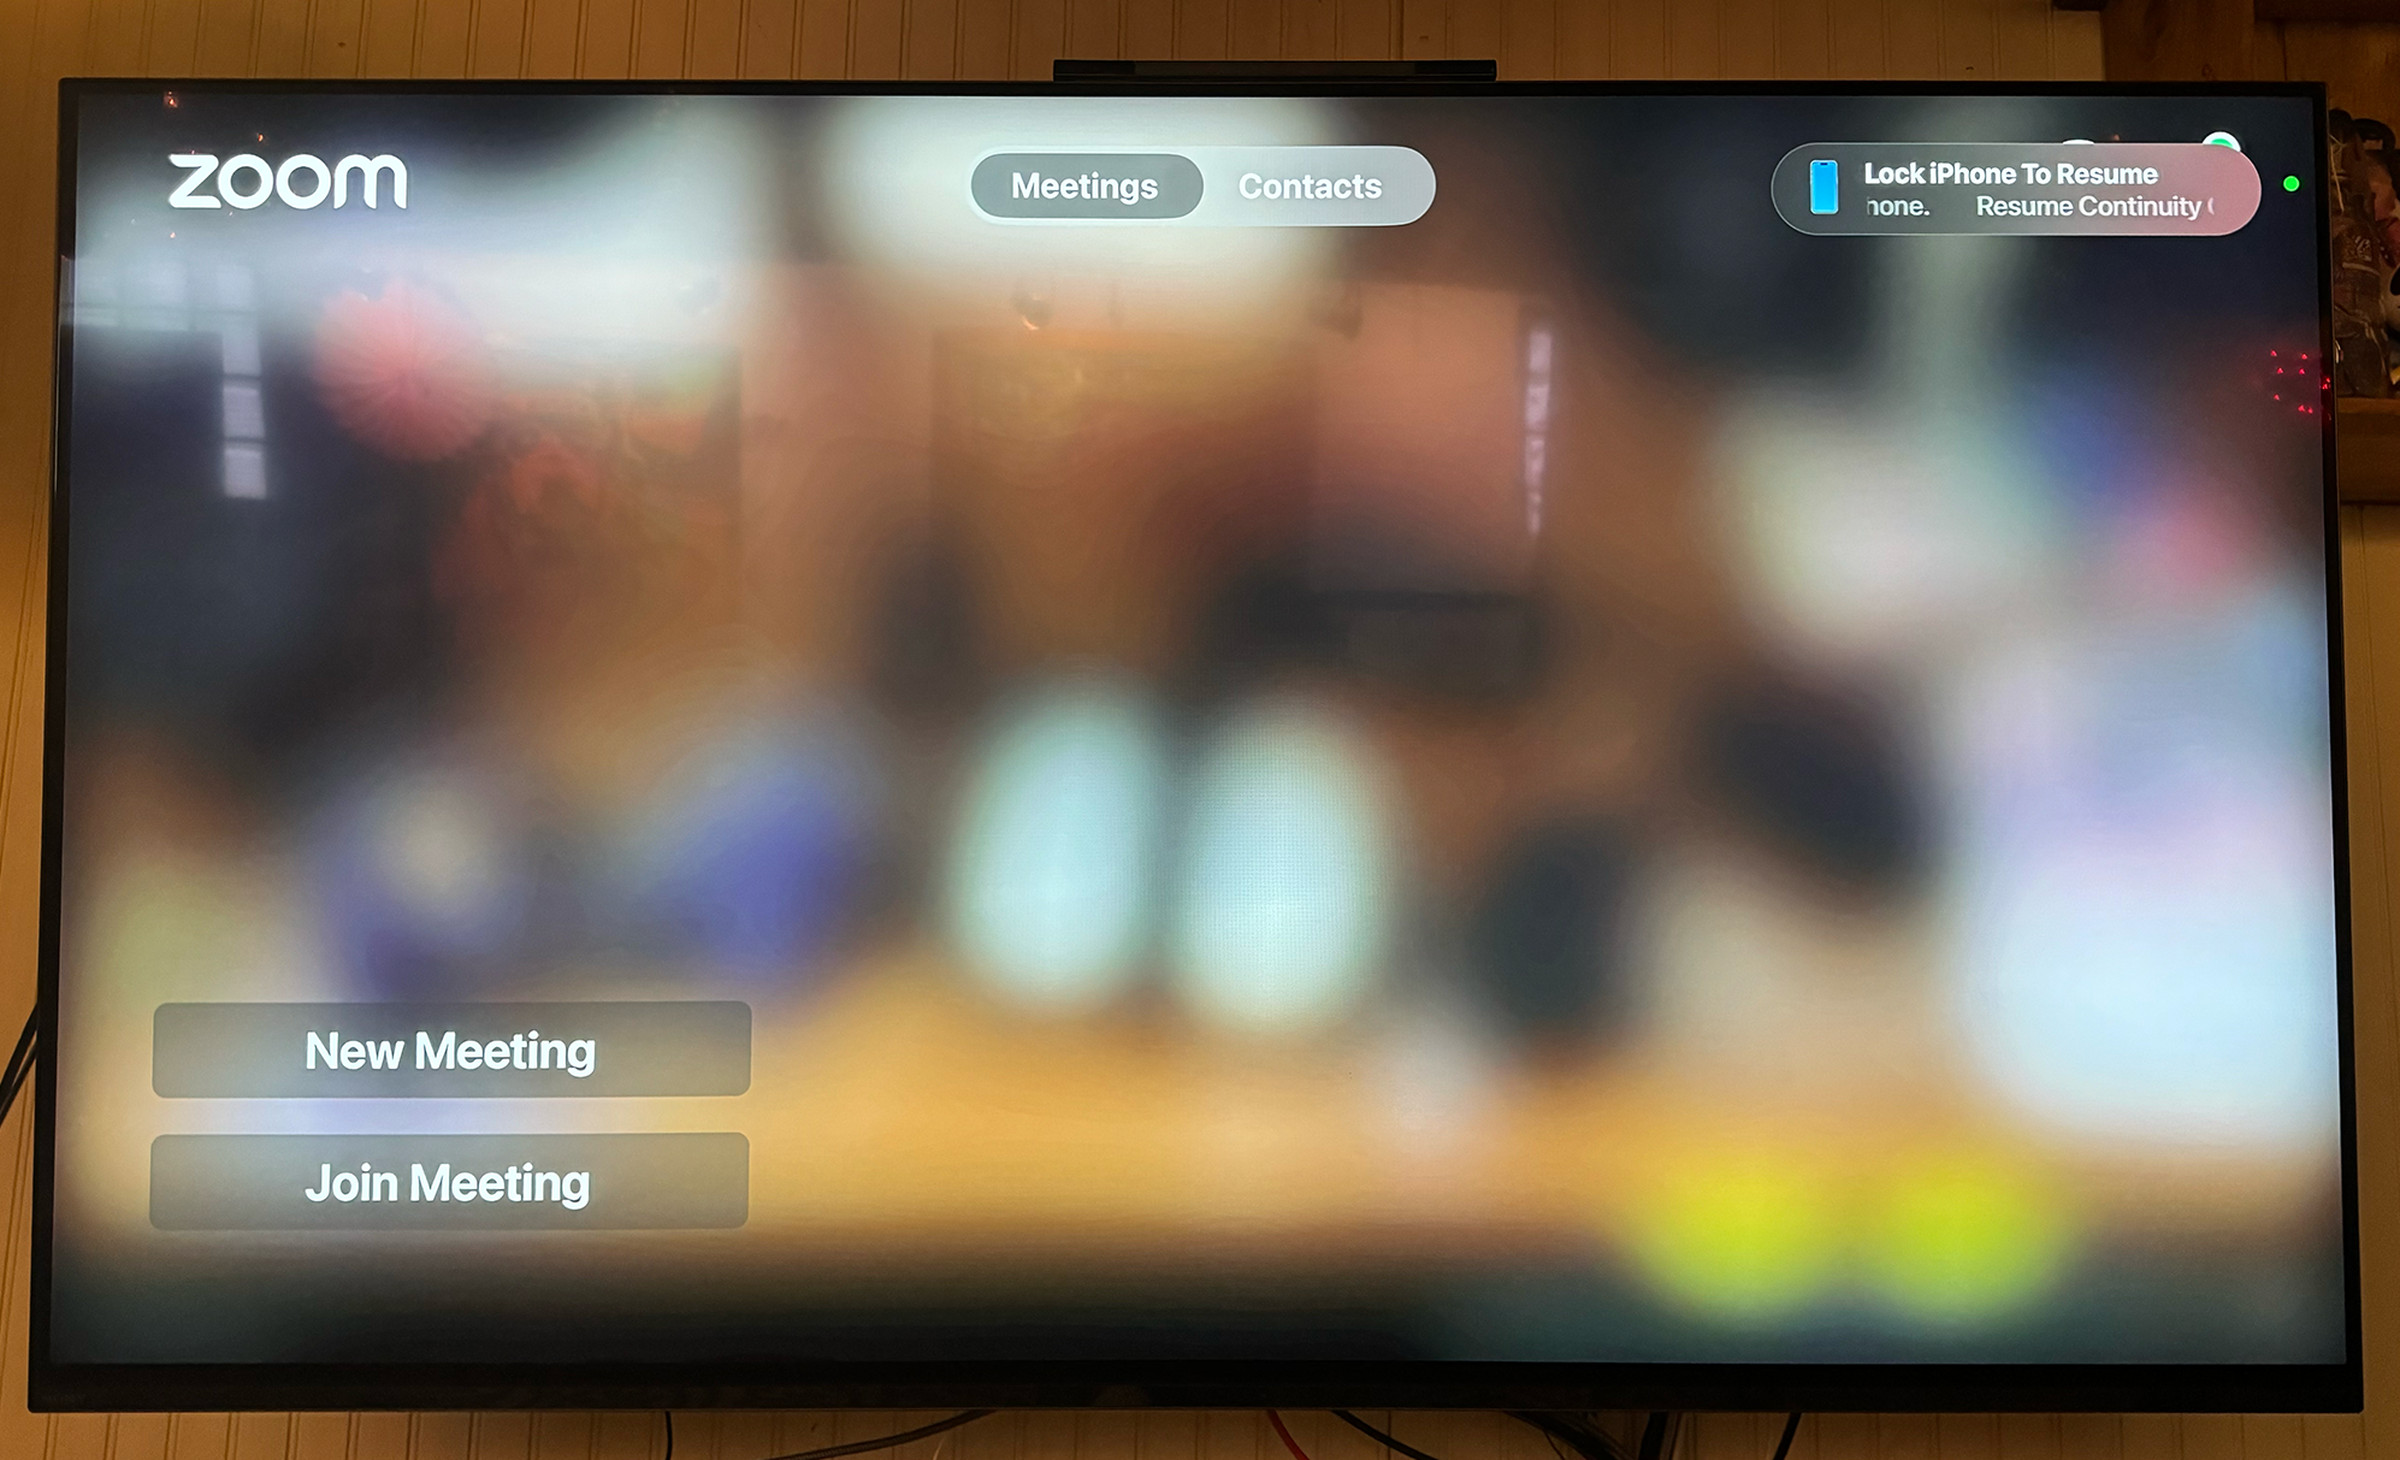 A picture of the Zoom meeting intro screen on a TV.